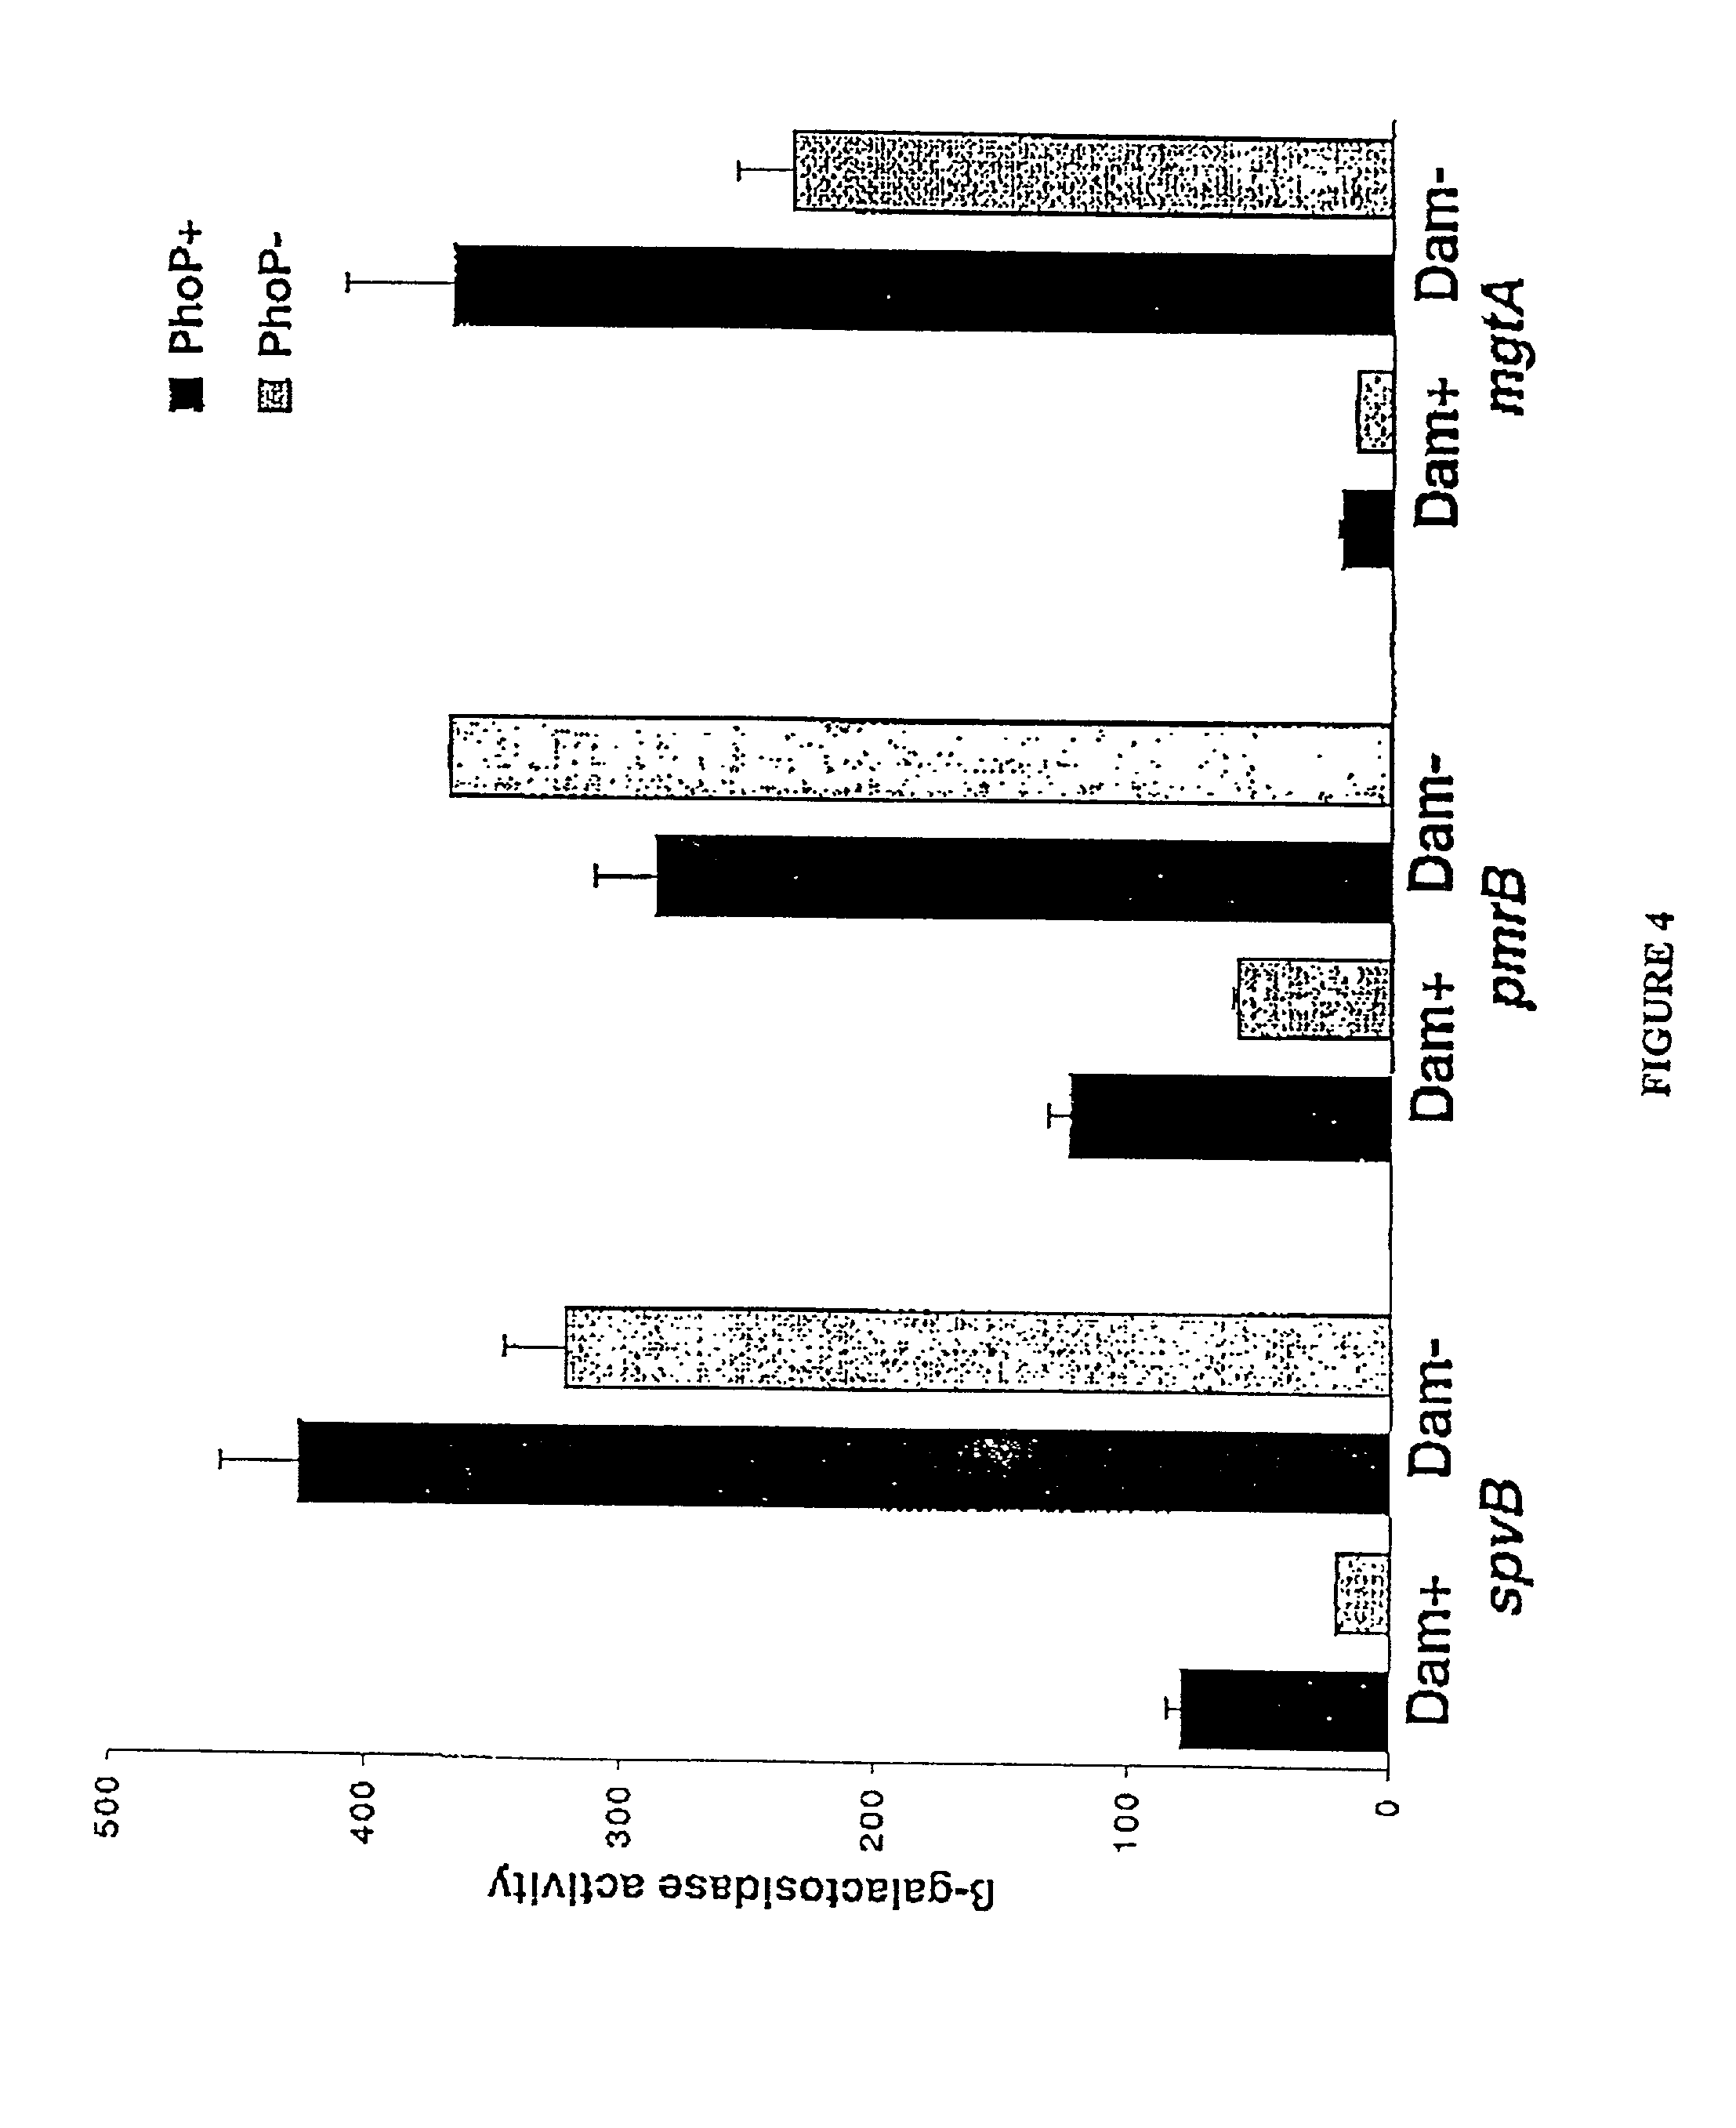 Method of creating antibodies and compositions used for same